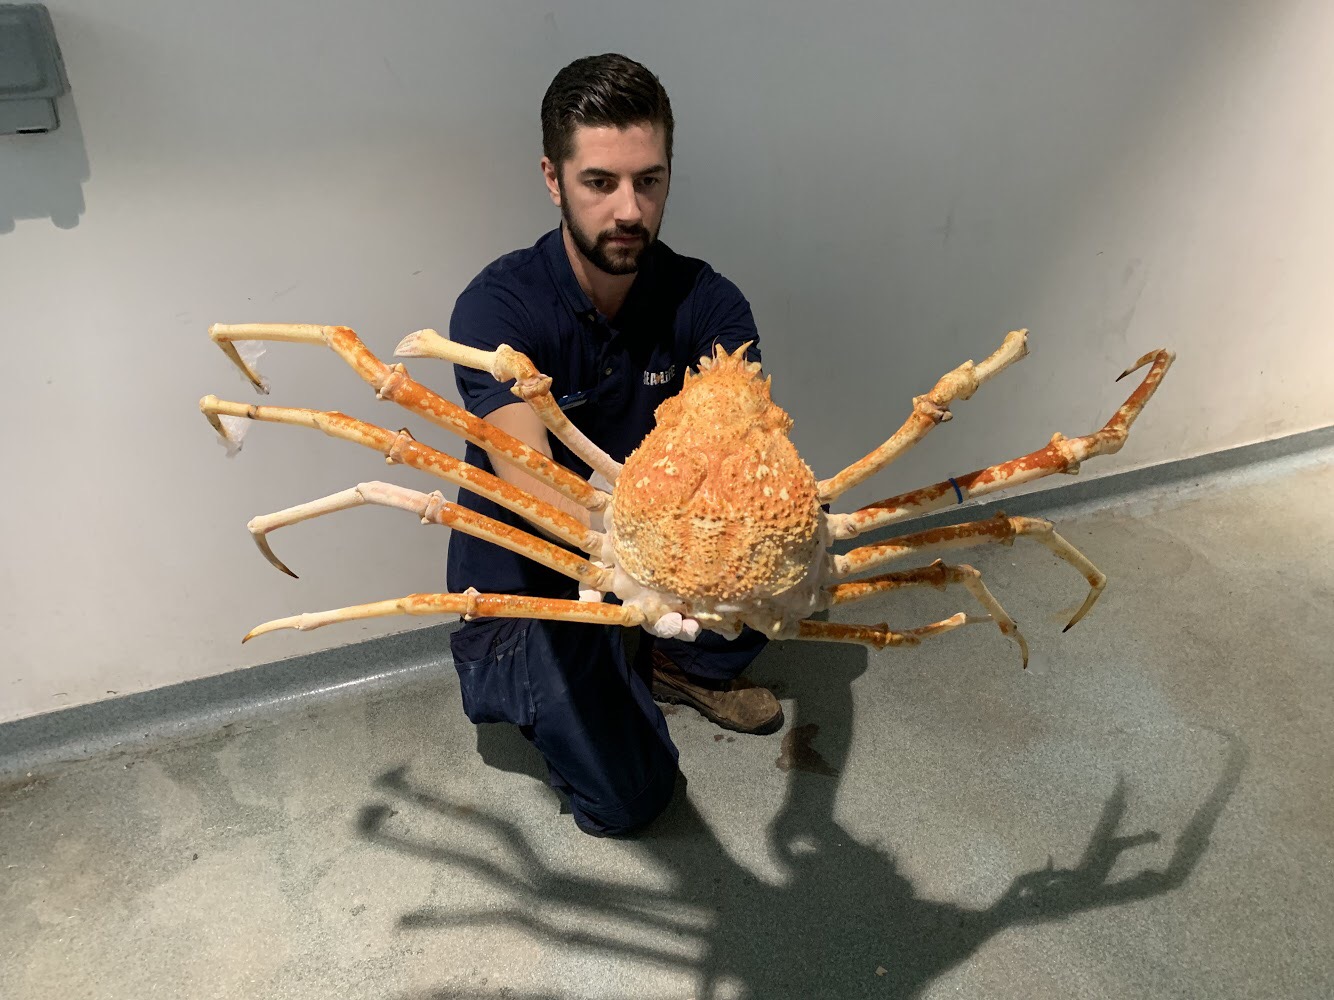 Here's 8 Reasons Why The Japanese Spider Crab Eating Food Is An